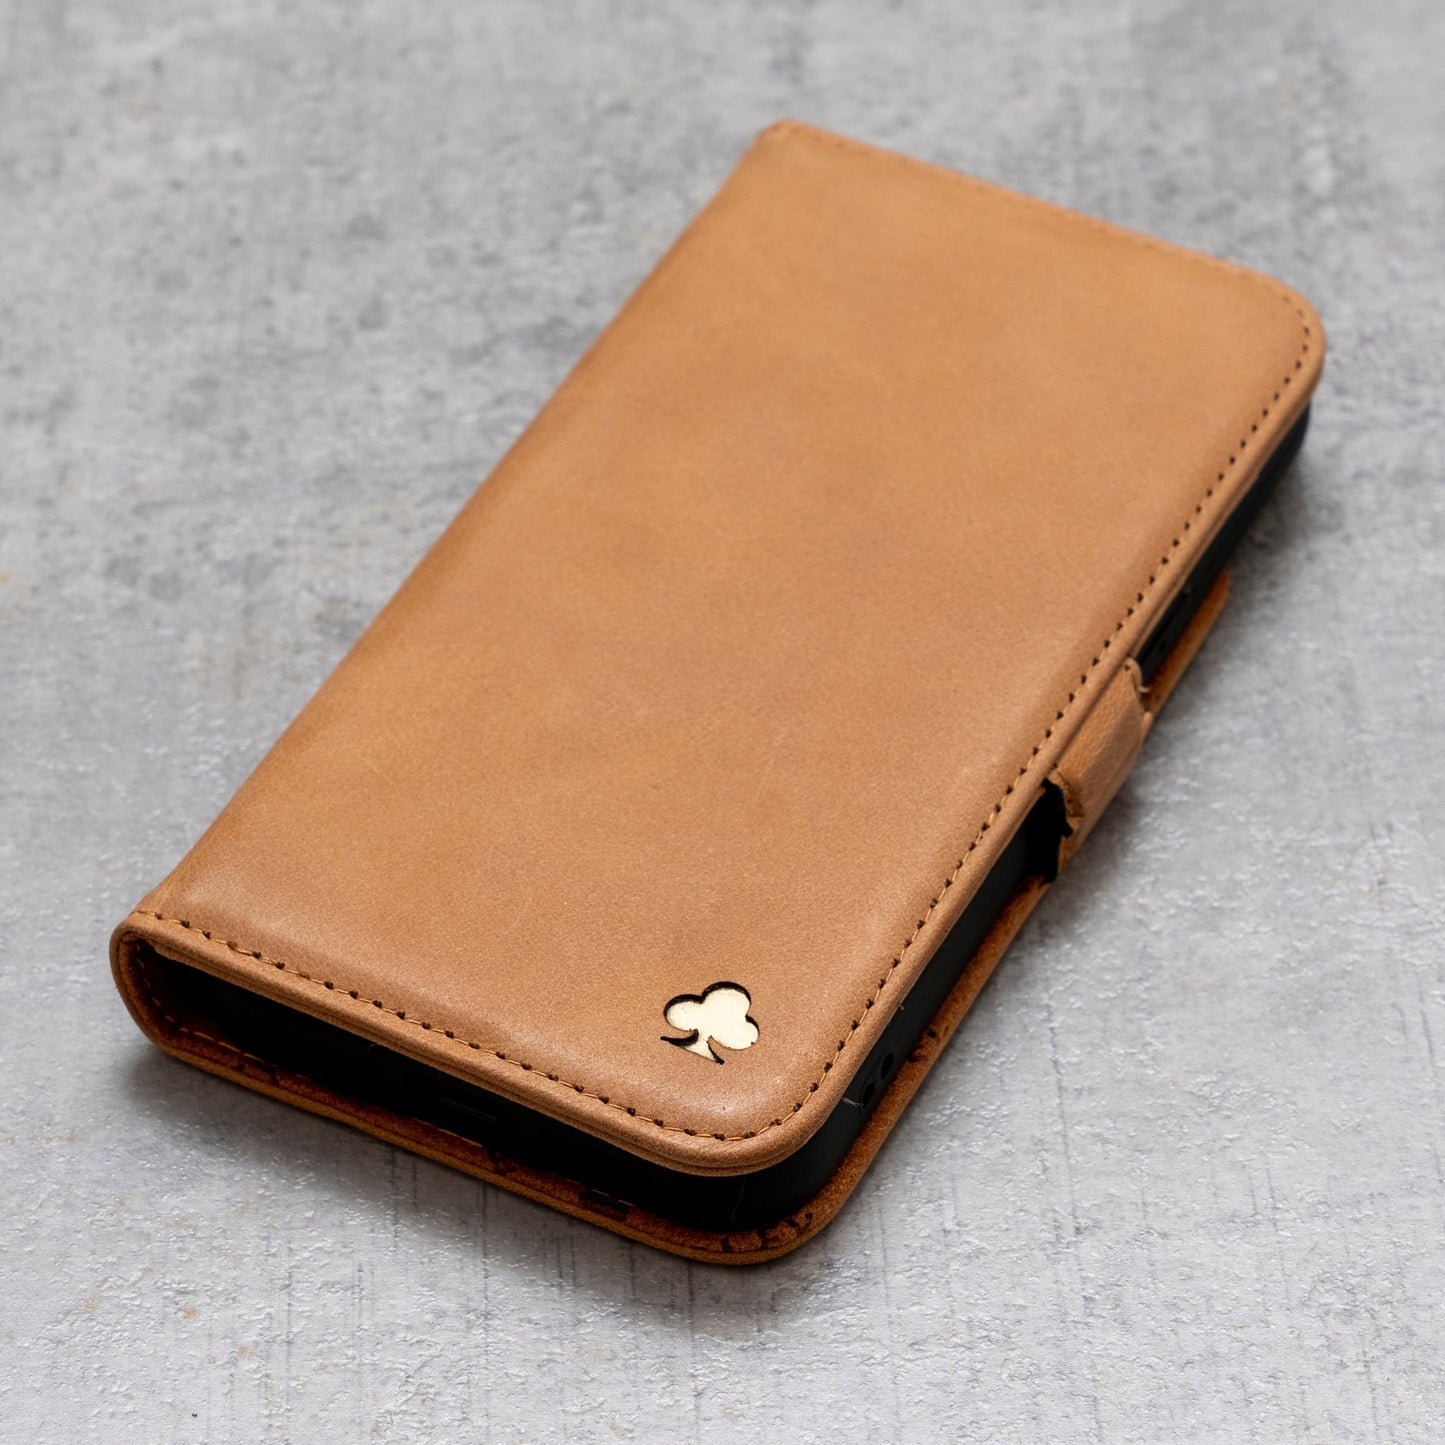 iPhone 15 Pro Leather Case. Premium Slim Genuine Leather Stand Case/Cover/Wallet (Tan)